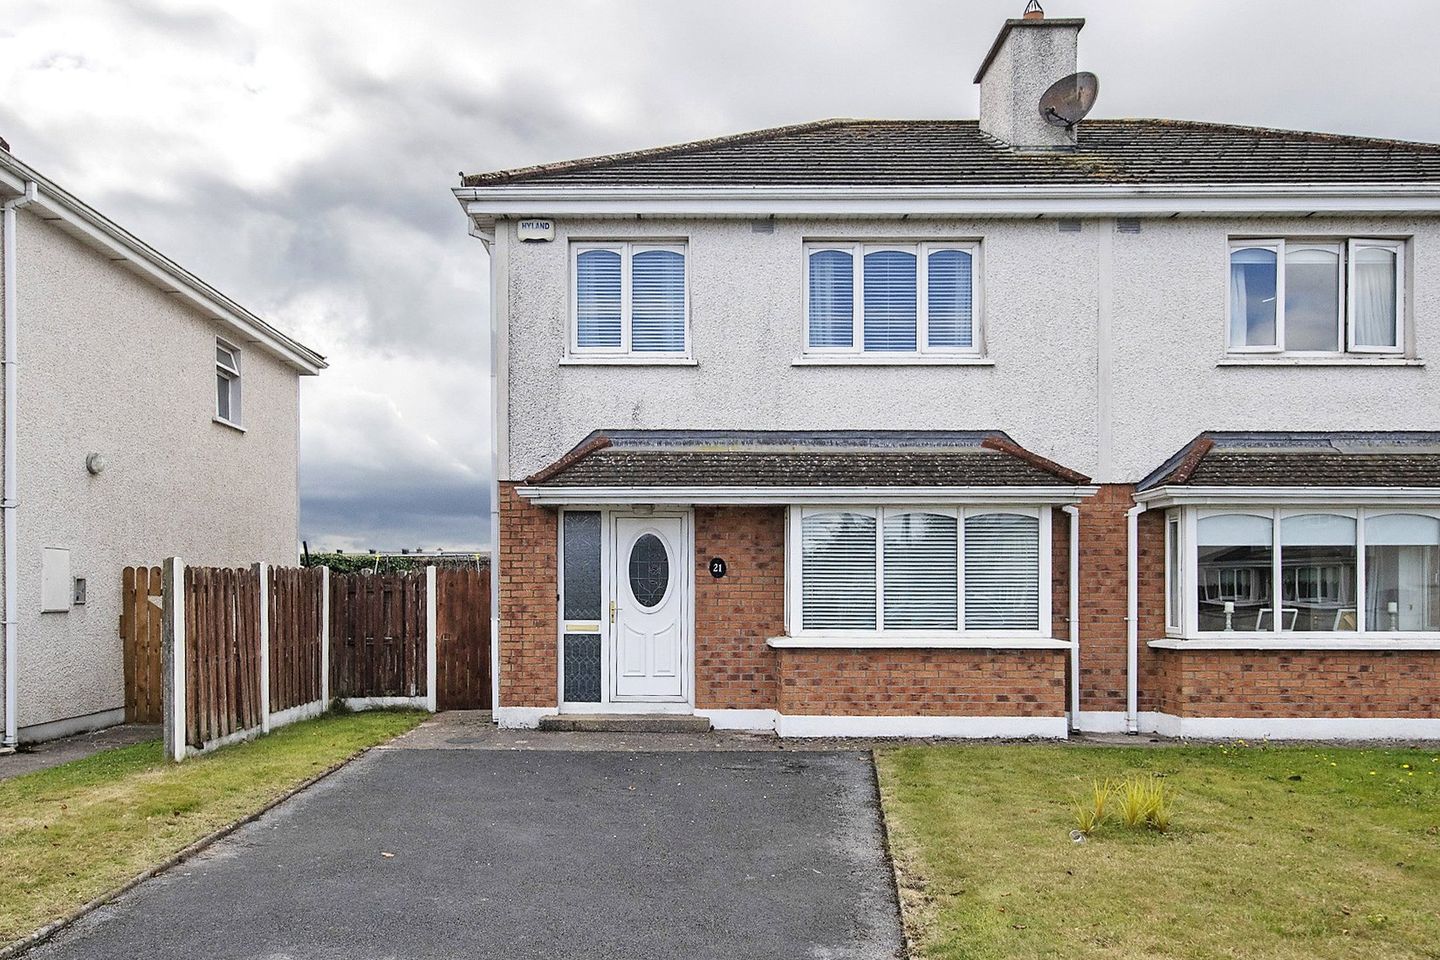 21 Willowbrook, Tallow, Co. Waterford, P51DF88